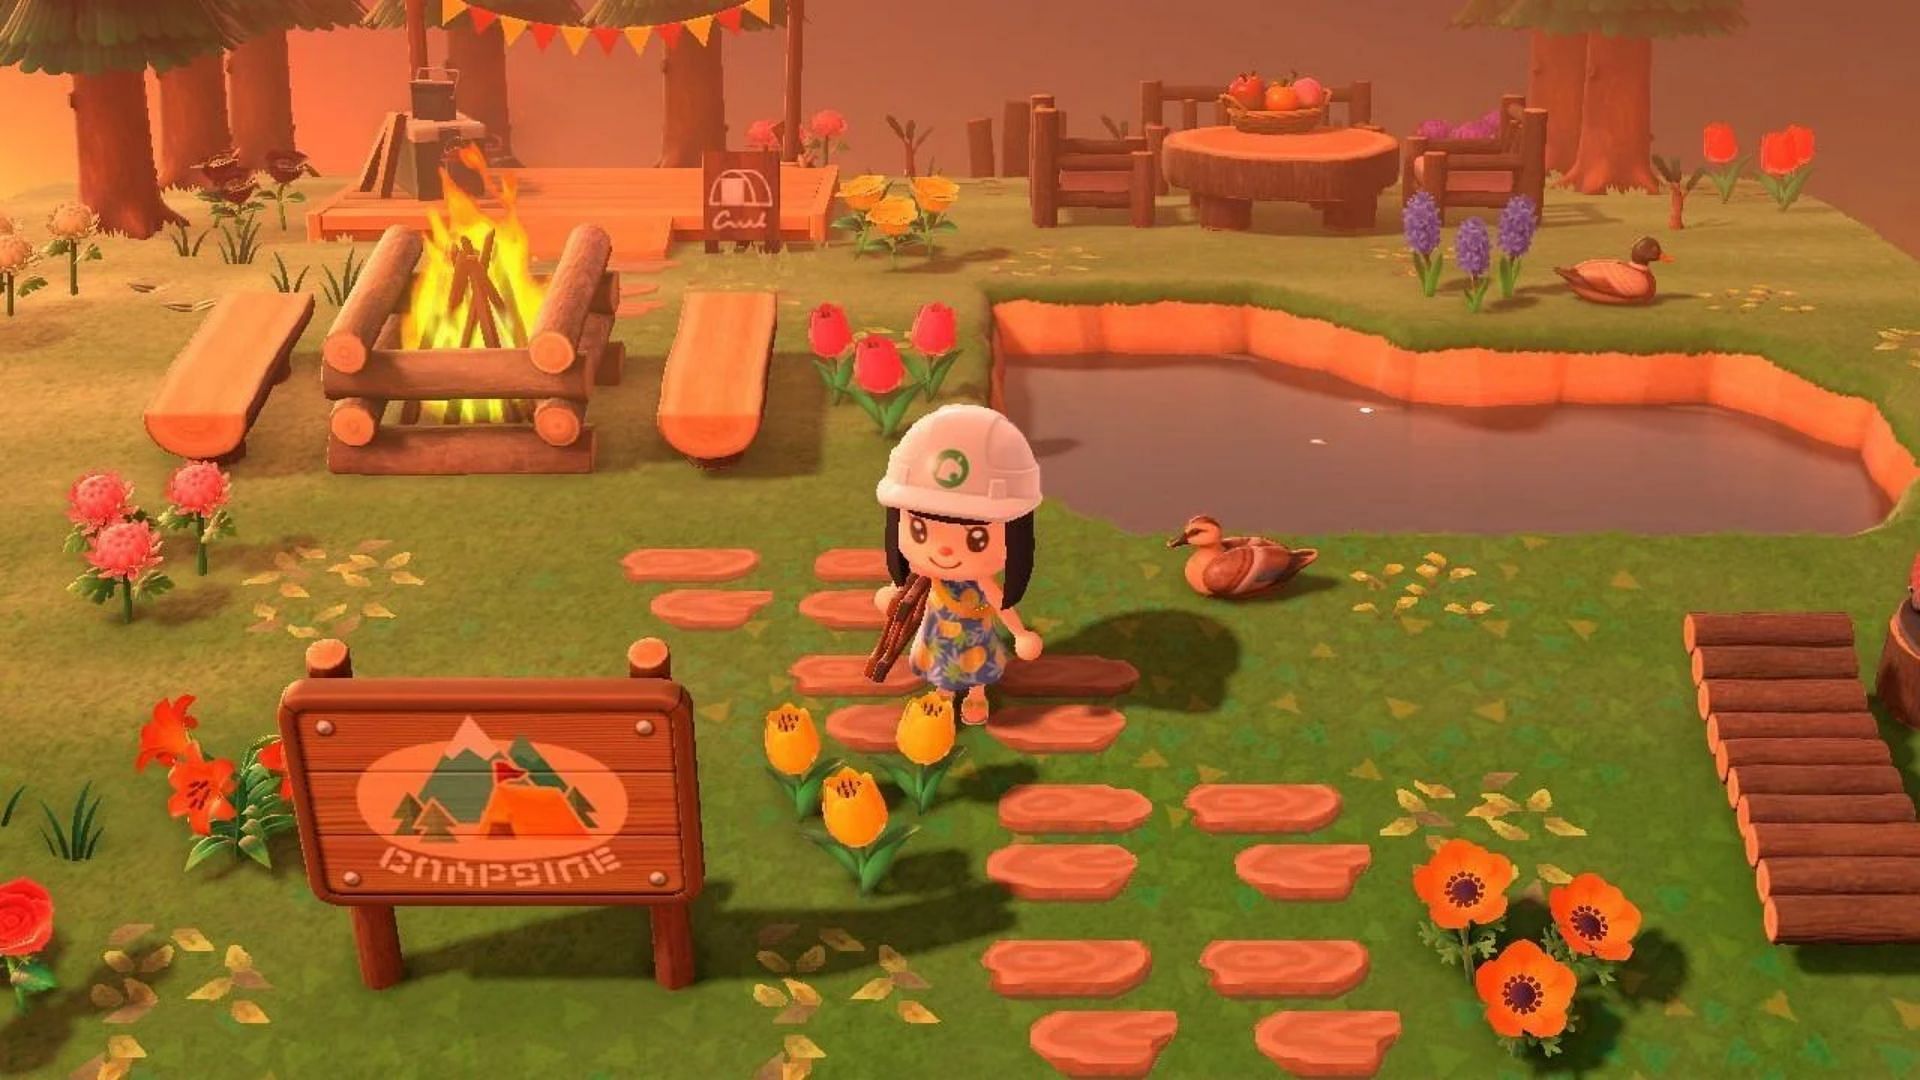 Animal Crossing: New Horizons players have some very creative ideas to decorate their island campsite (Image via AnimalCrossing/Reddit)